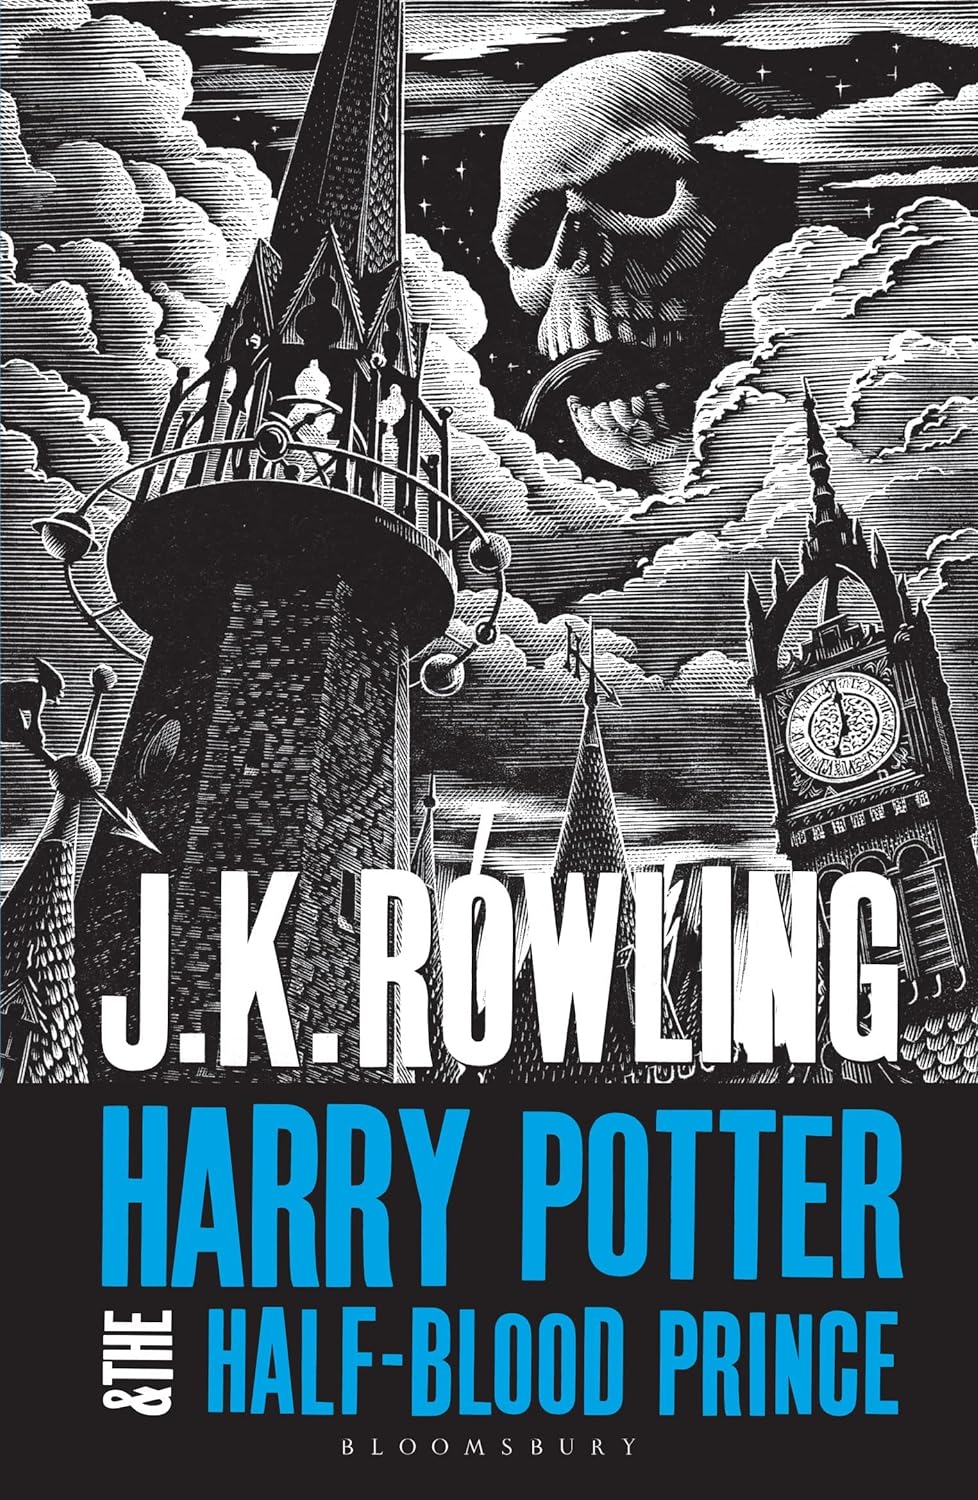 Sách Ngoại Văn - Harry Potter and the Half-Blood Prince [Paperback] by J.K. Rowling (Author)